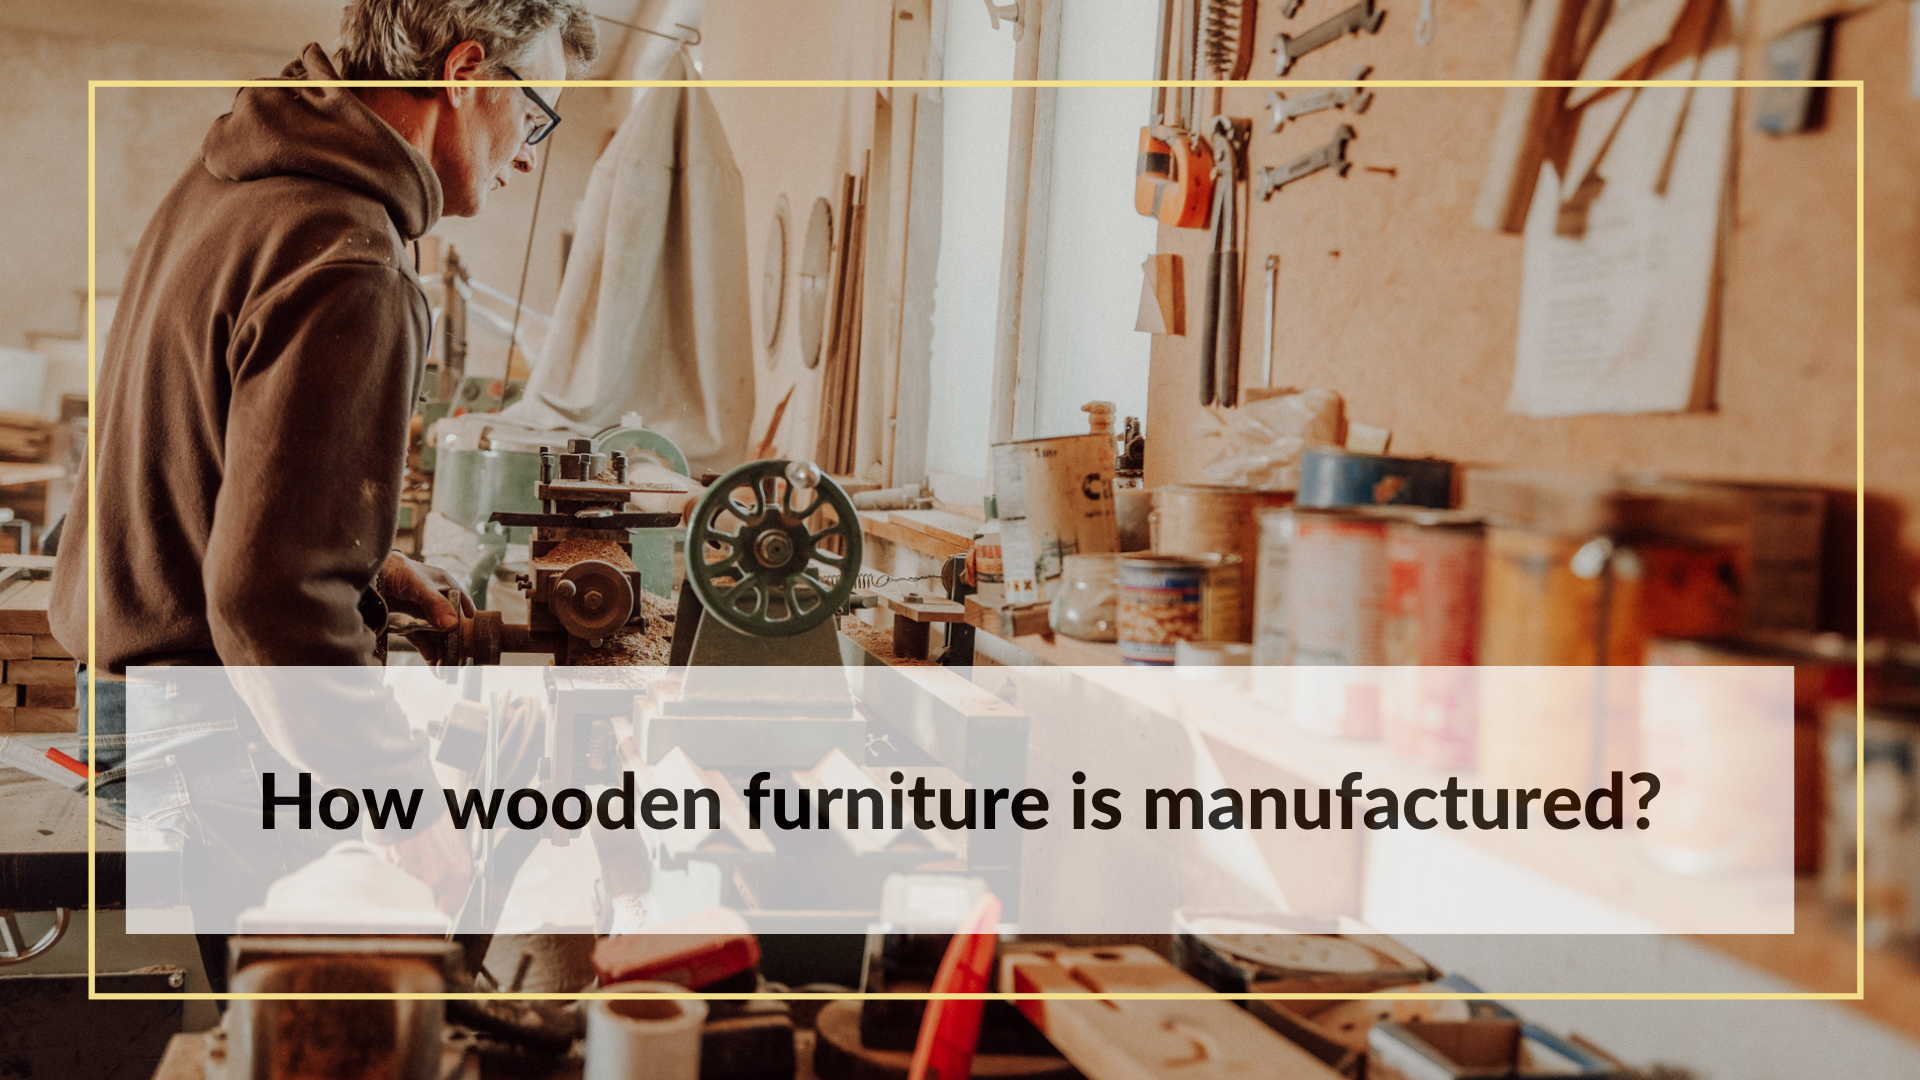 How wooden furniture is manufactured